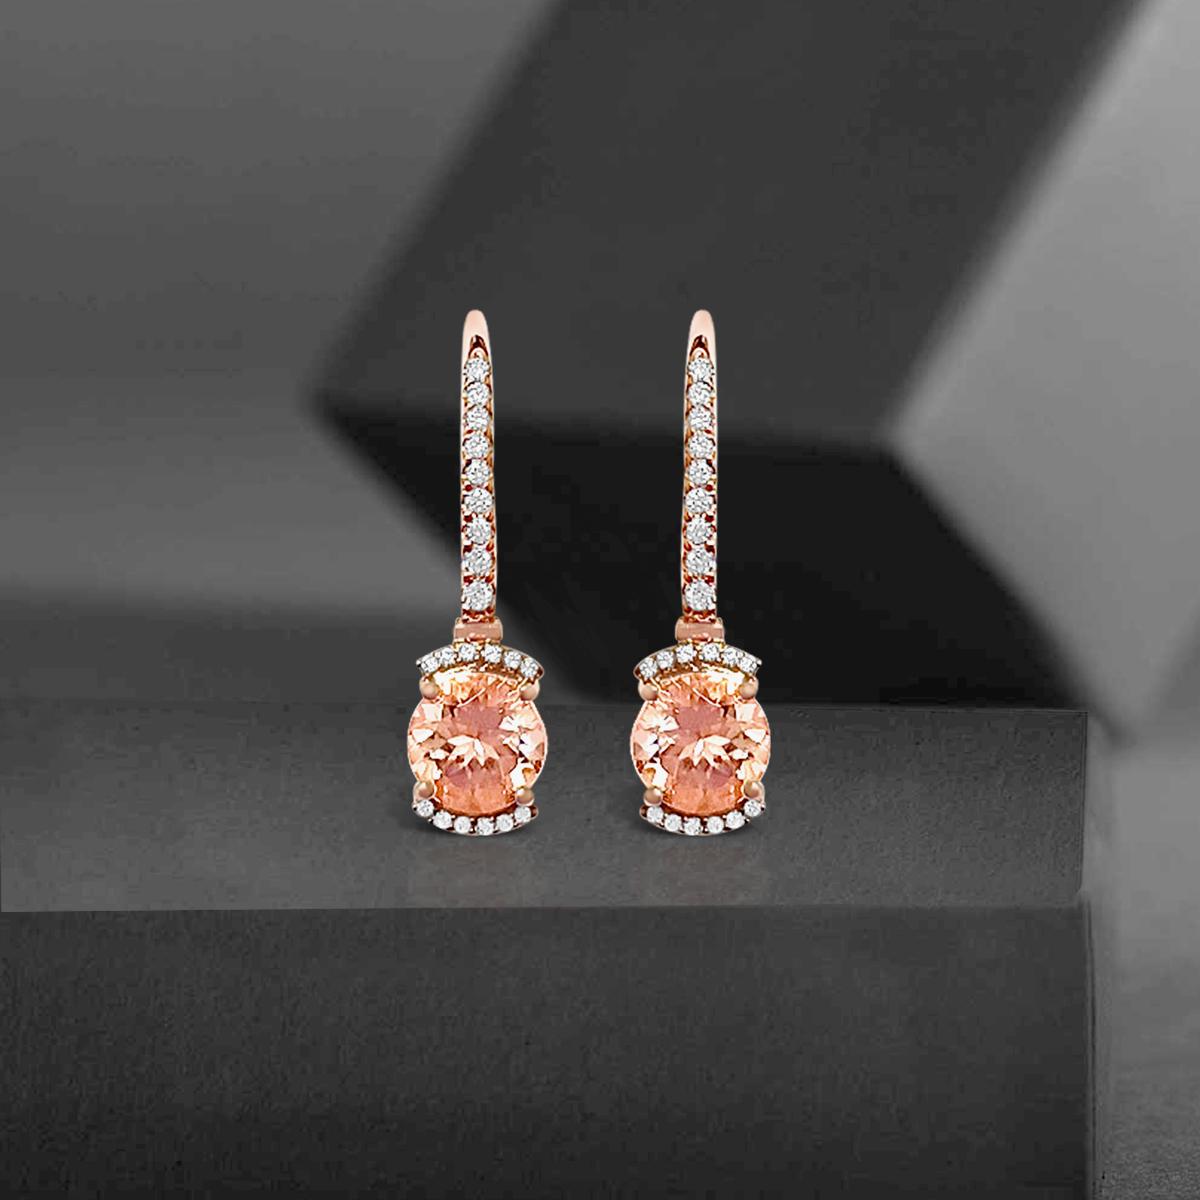 These Shimmering Dangle Earrings Features Round Shaped 7mm Morganite Gemstone And Dazzling Round Diamonds. This Classic Pair Is Set In 14K Rose Gold And Are Secured With Lever-Back Closures. The Stones Used Are Of True Gem Quality, The Metal Work Is